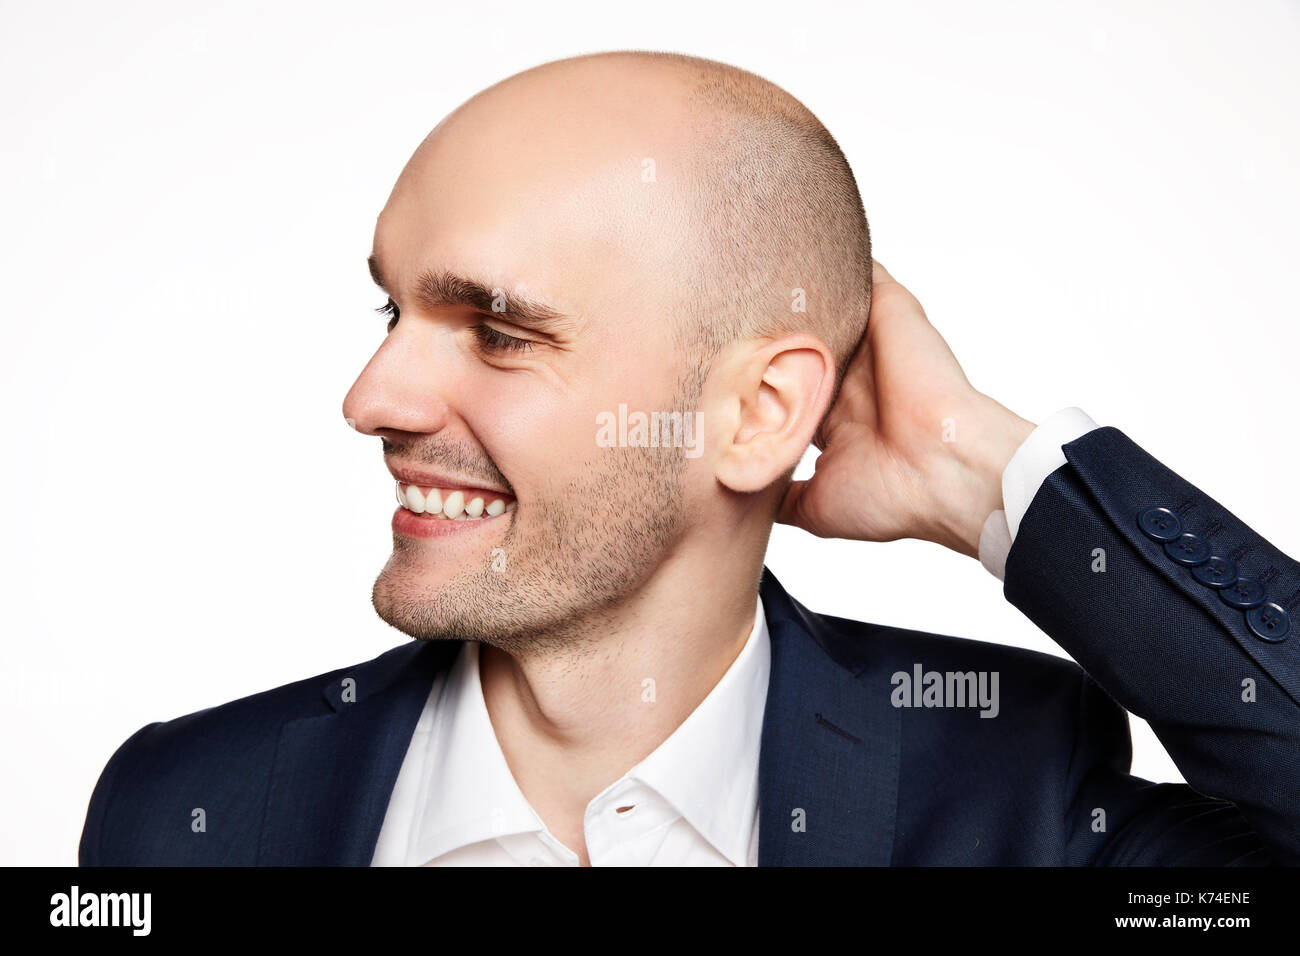 Side view of young man wearing suit. Stock Photo